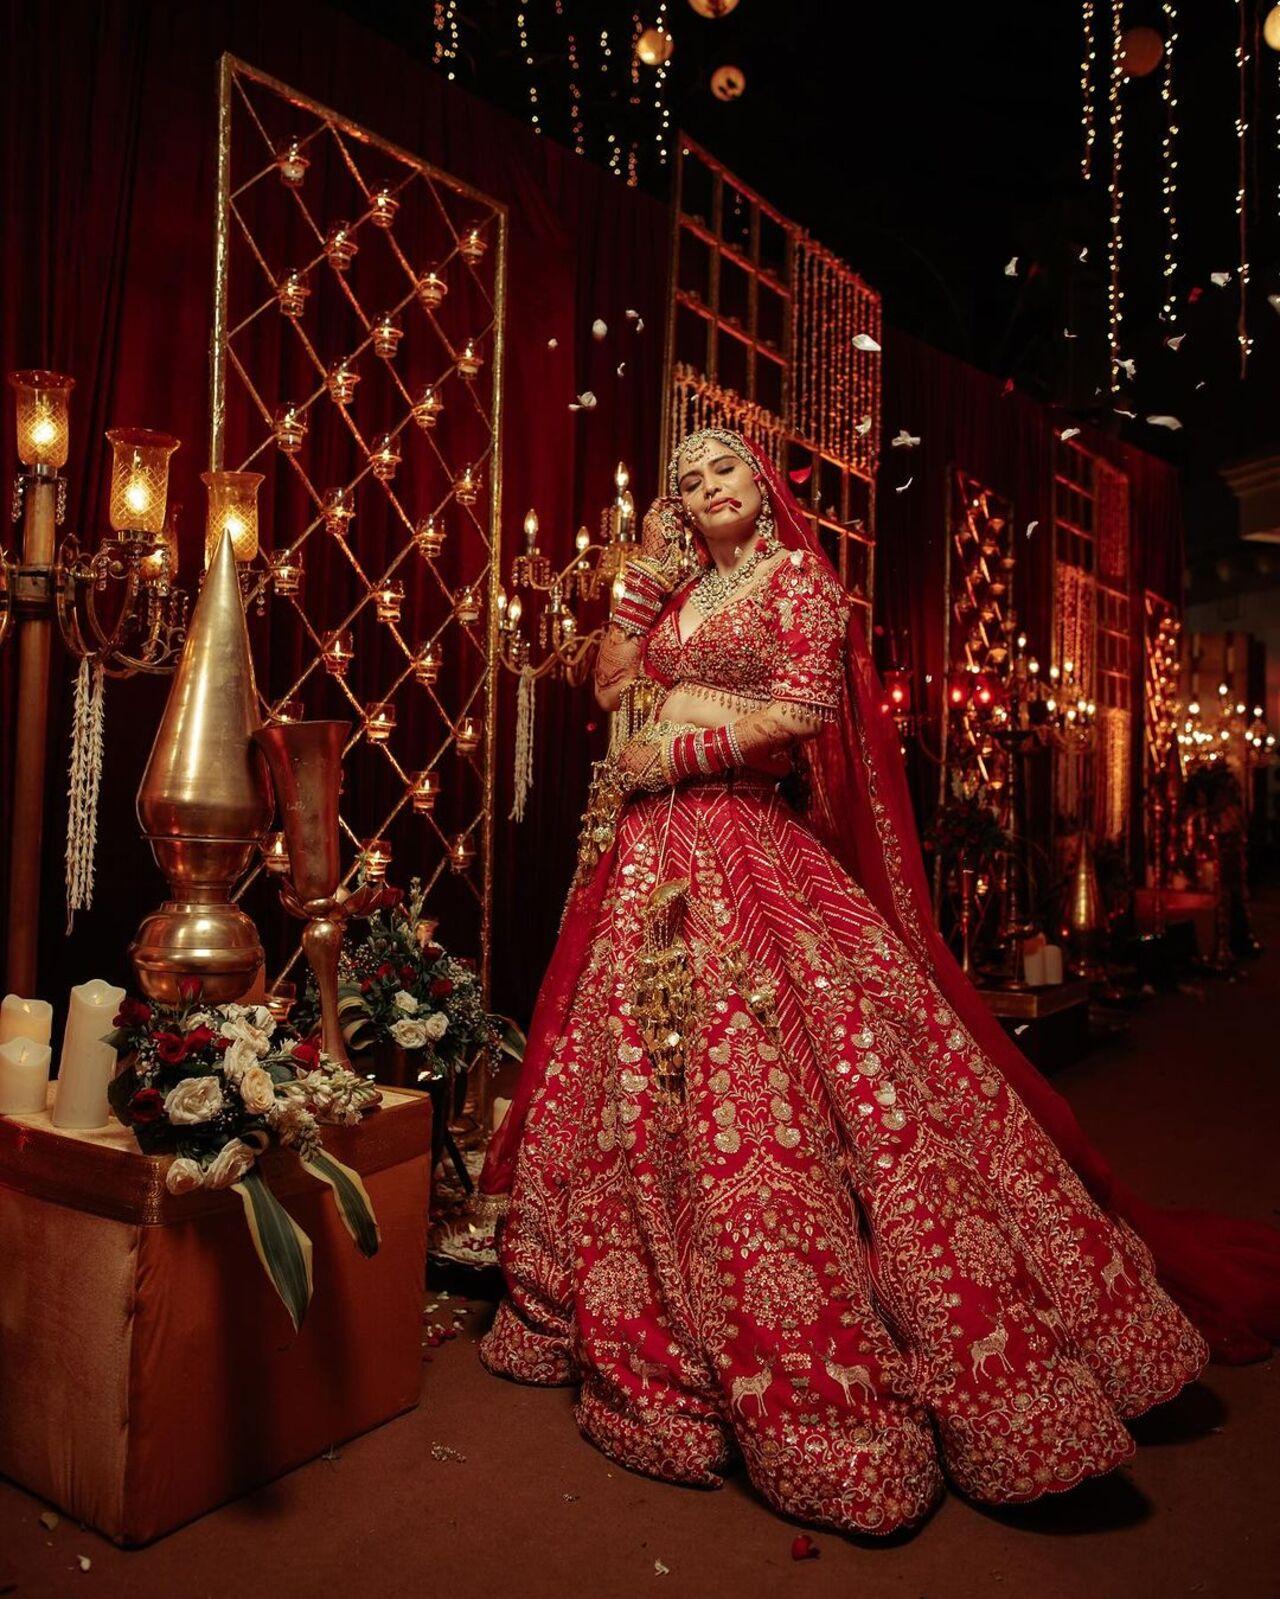 The actress shared multiple solo shots of herself in her bridal wear flaunting the beauty of her look for the big day